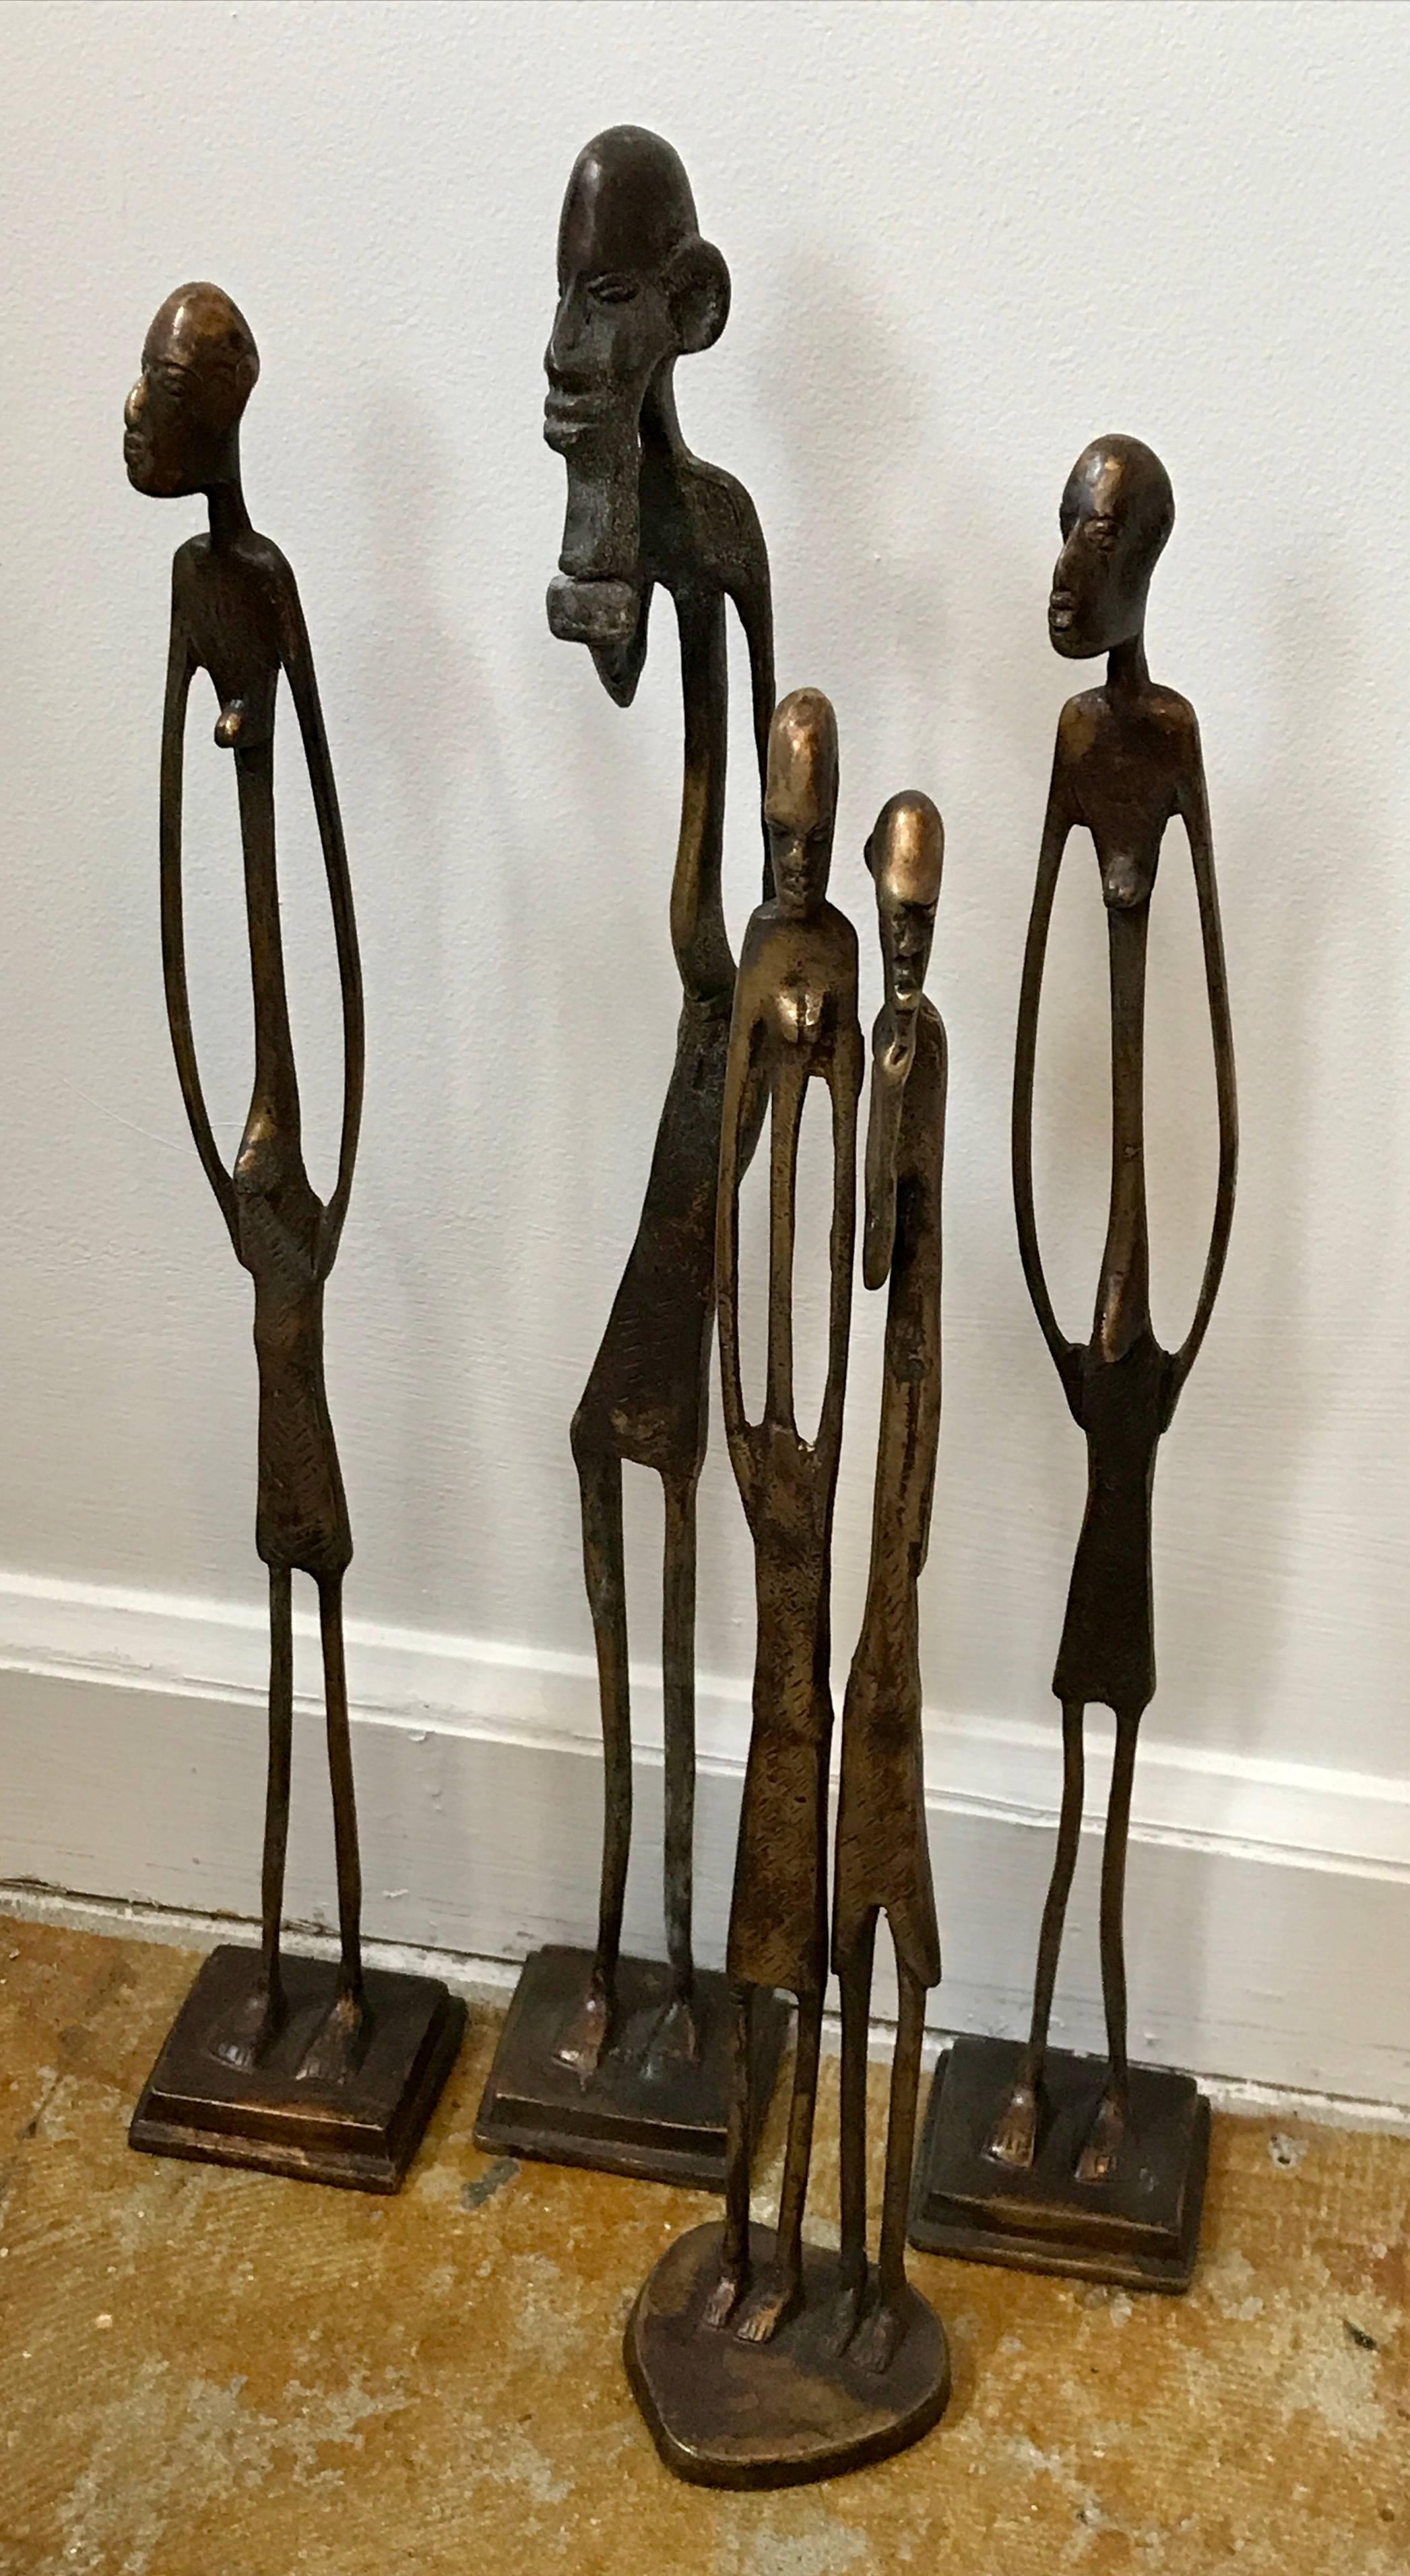 Very cool grouping of four abstract figural sculptures in the style of Giocometti, cast in bronze.